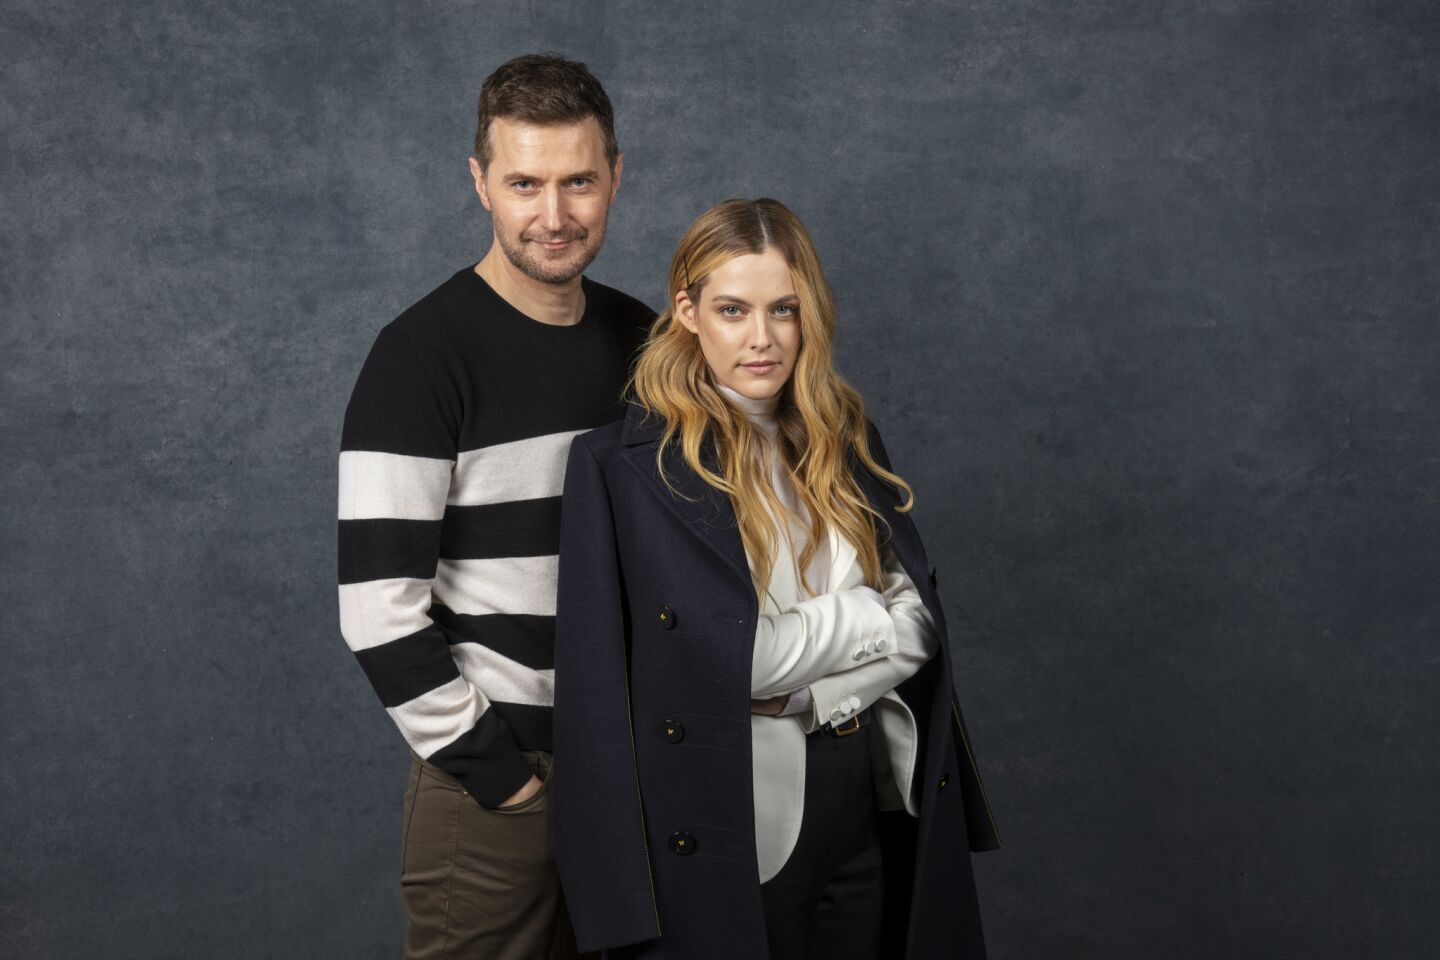 Actors Richard Armitage and Riley Keough, from the film "The Lodge," photographed at the 2019 Sundance Film Festival in Park City, Utah, on Friday, Jan. 25.